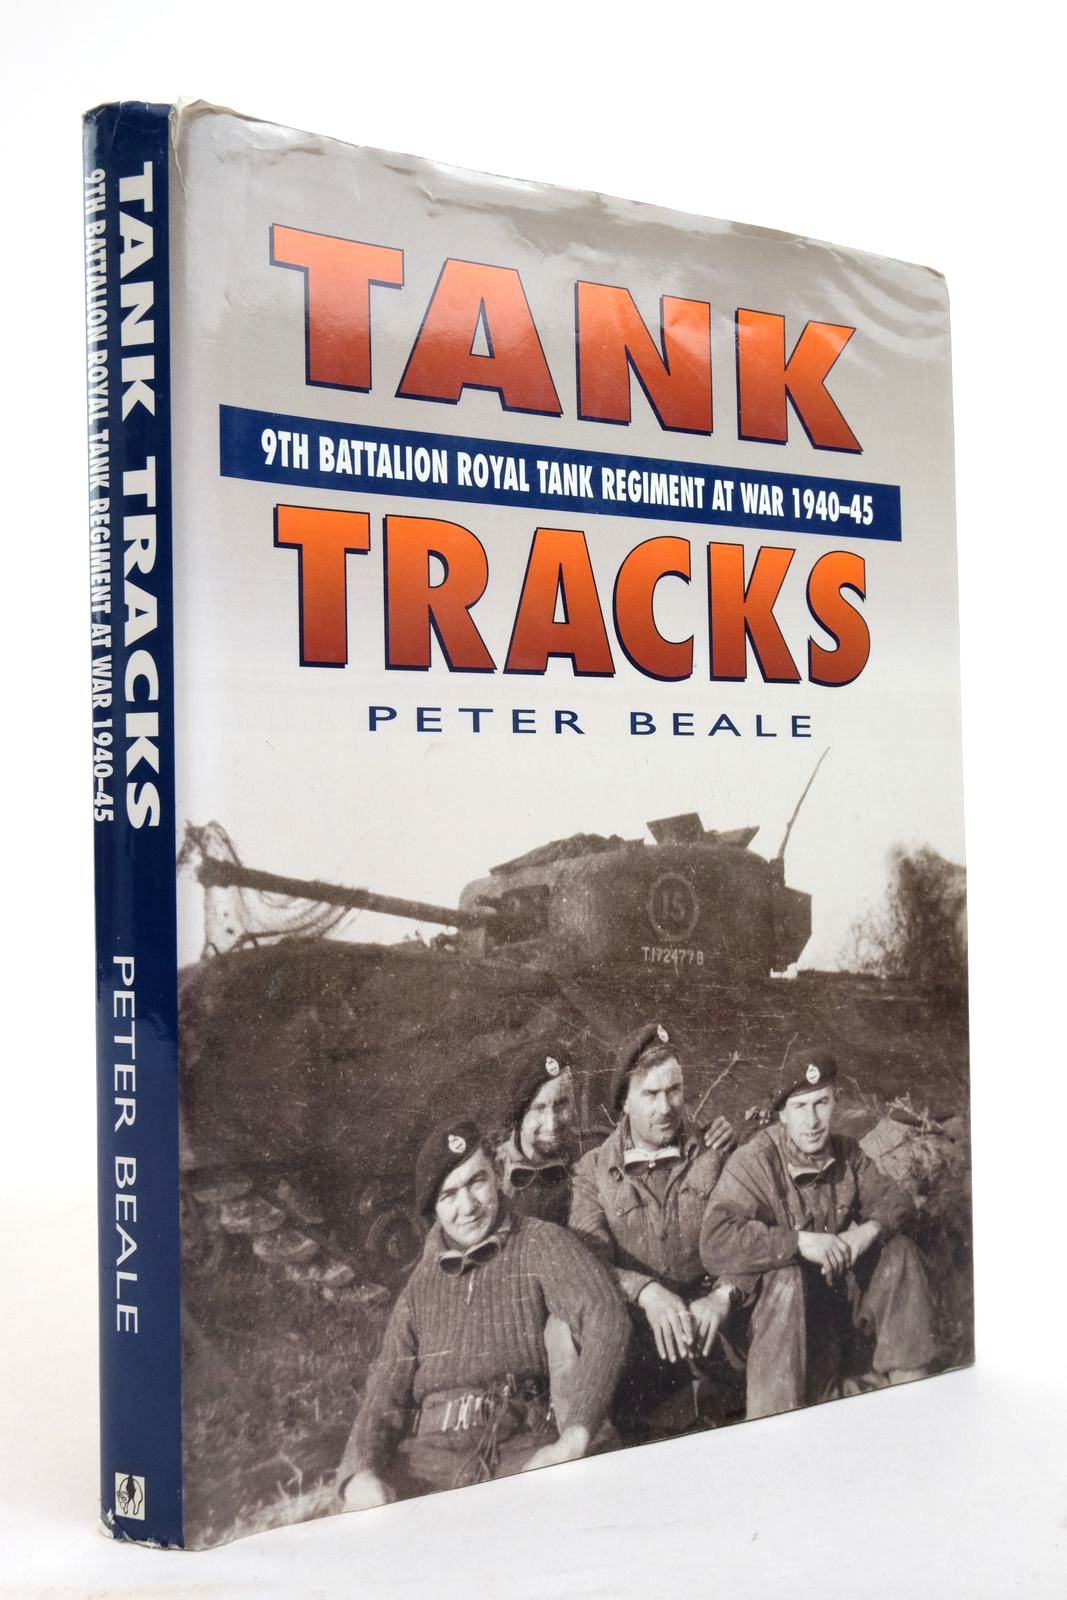 Photo of TANK TRACKS 9TH BATTALION ROYAL TANK REGIMENT AT WAR 1940-45 written by Beales, Peter published by Alan Sutton (STOCK CODE: 2138385)  for sale by Stella & Rose's Books